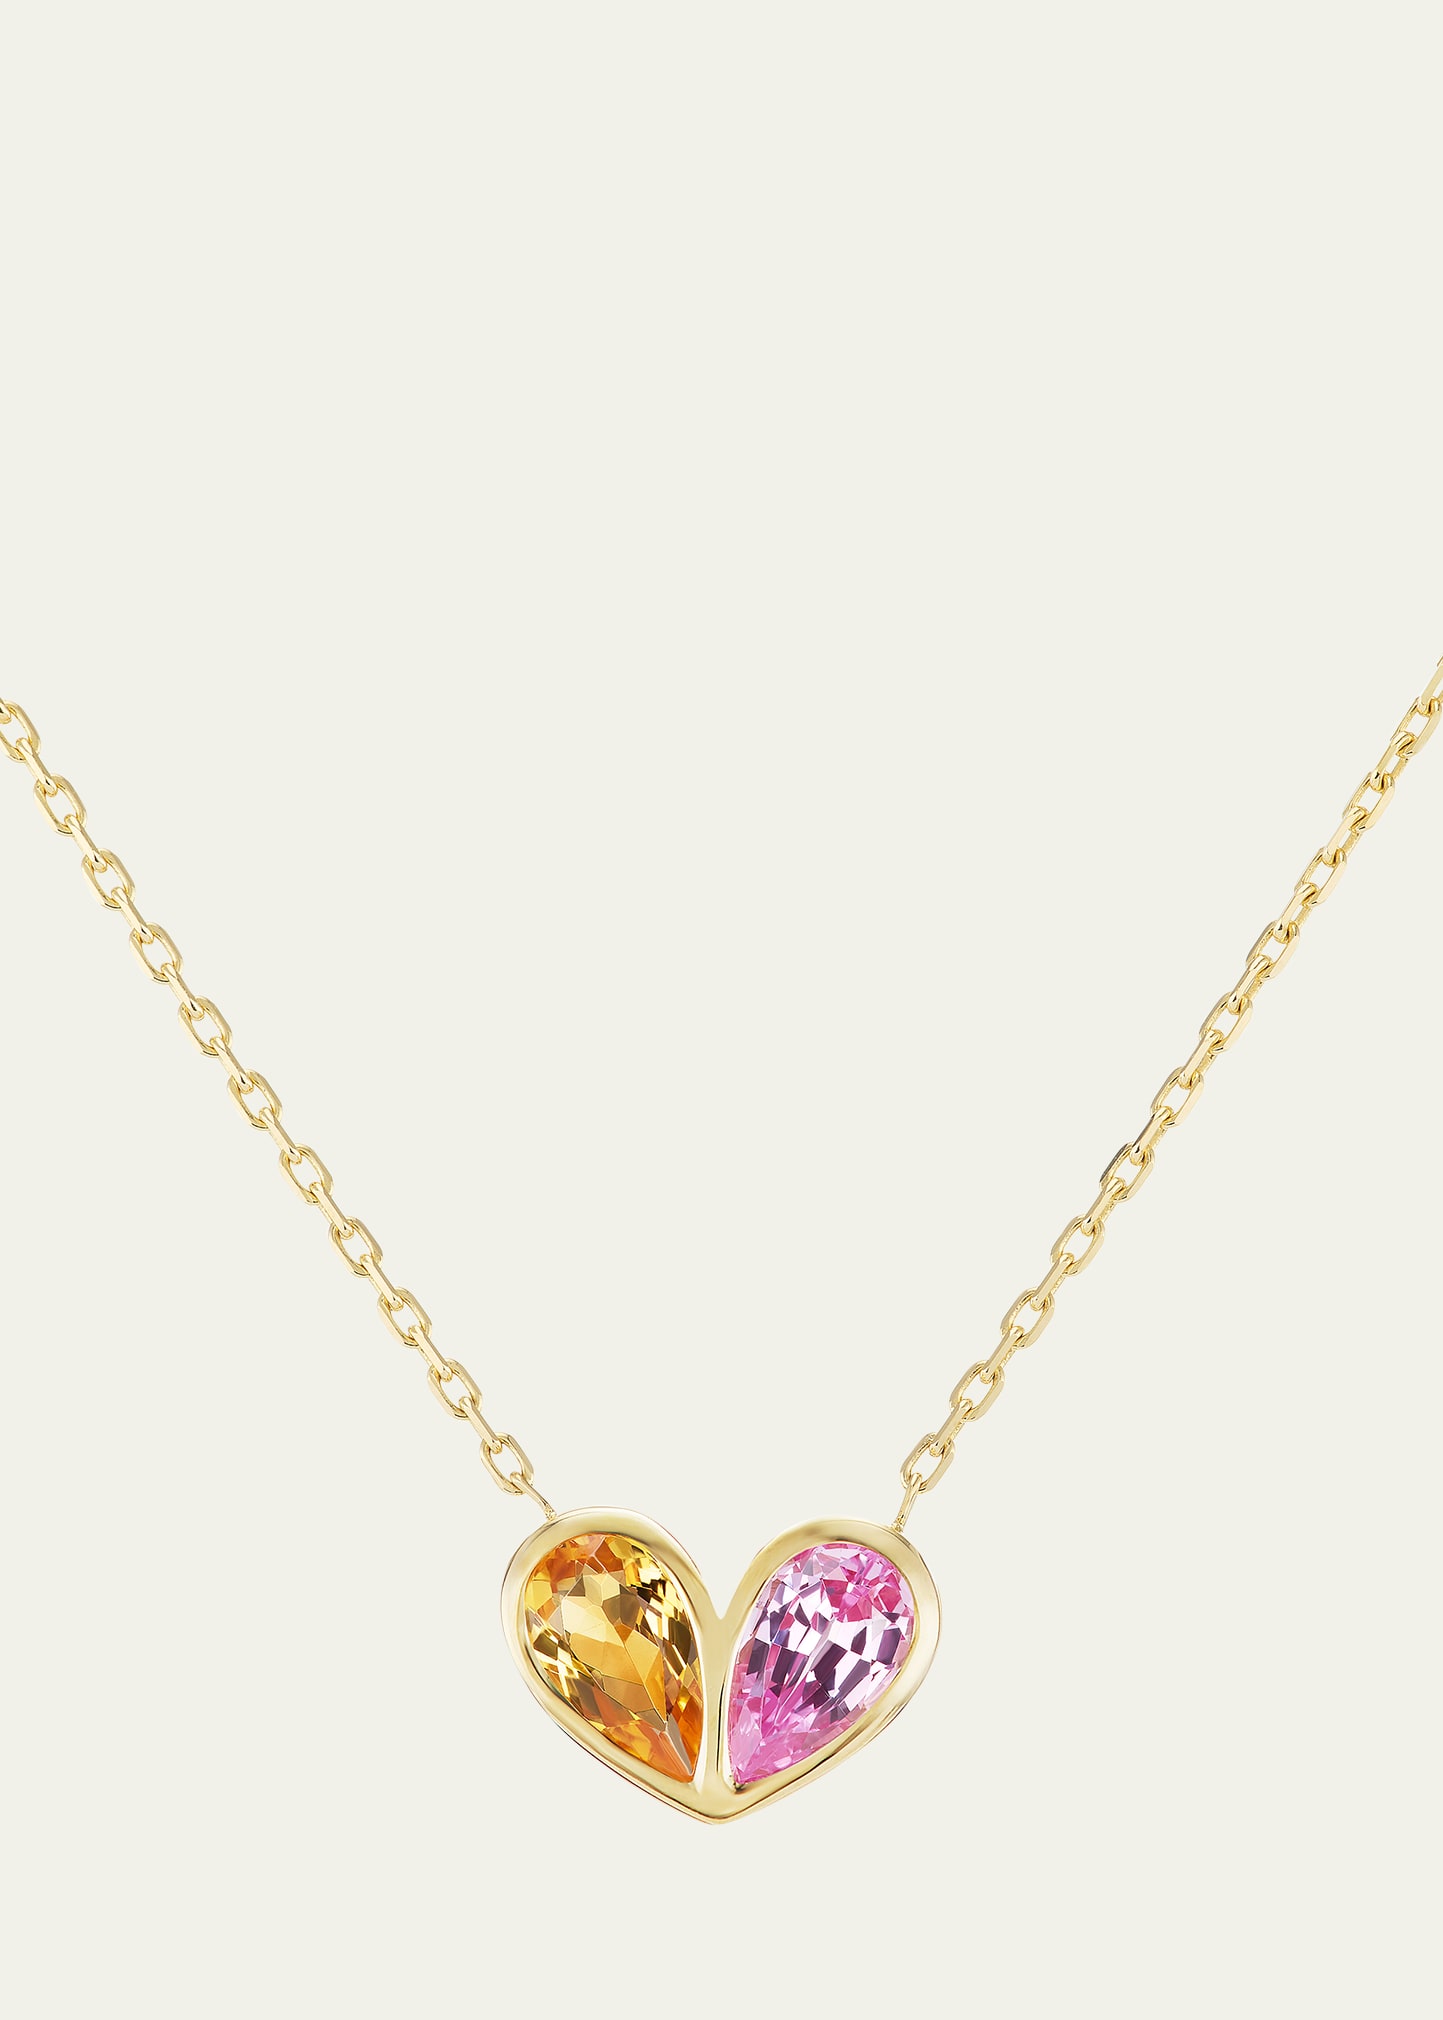 18k Gold Jumbo Sweetheart Necklace with Citrine and Pink Sapphire